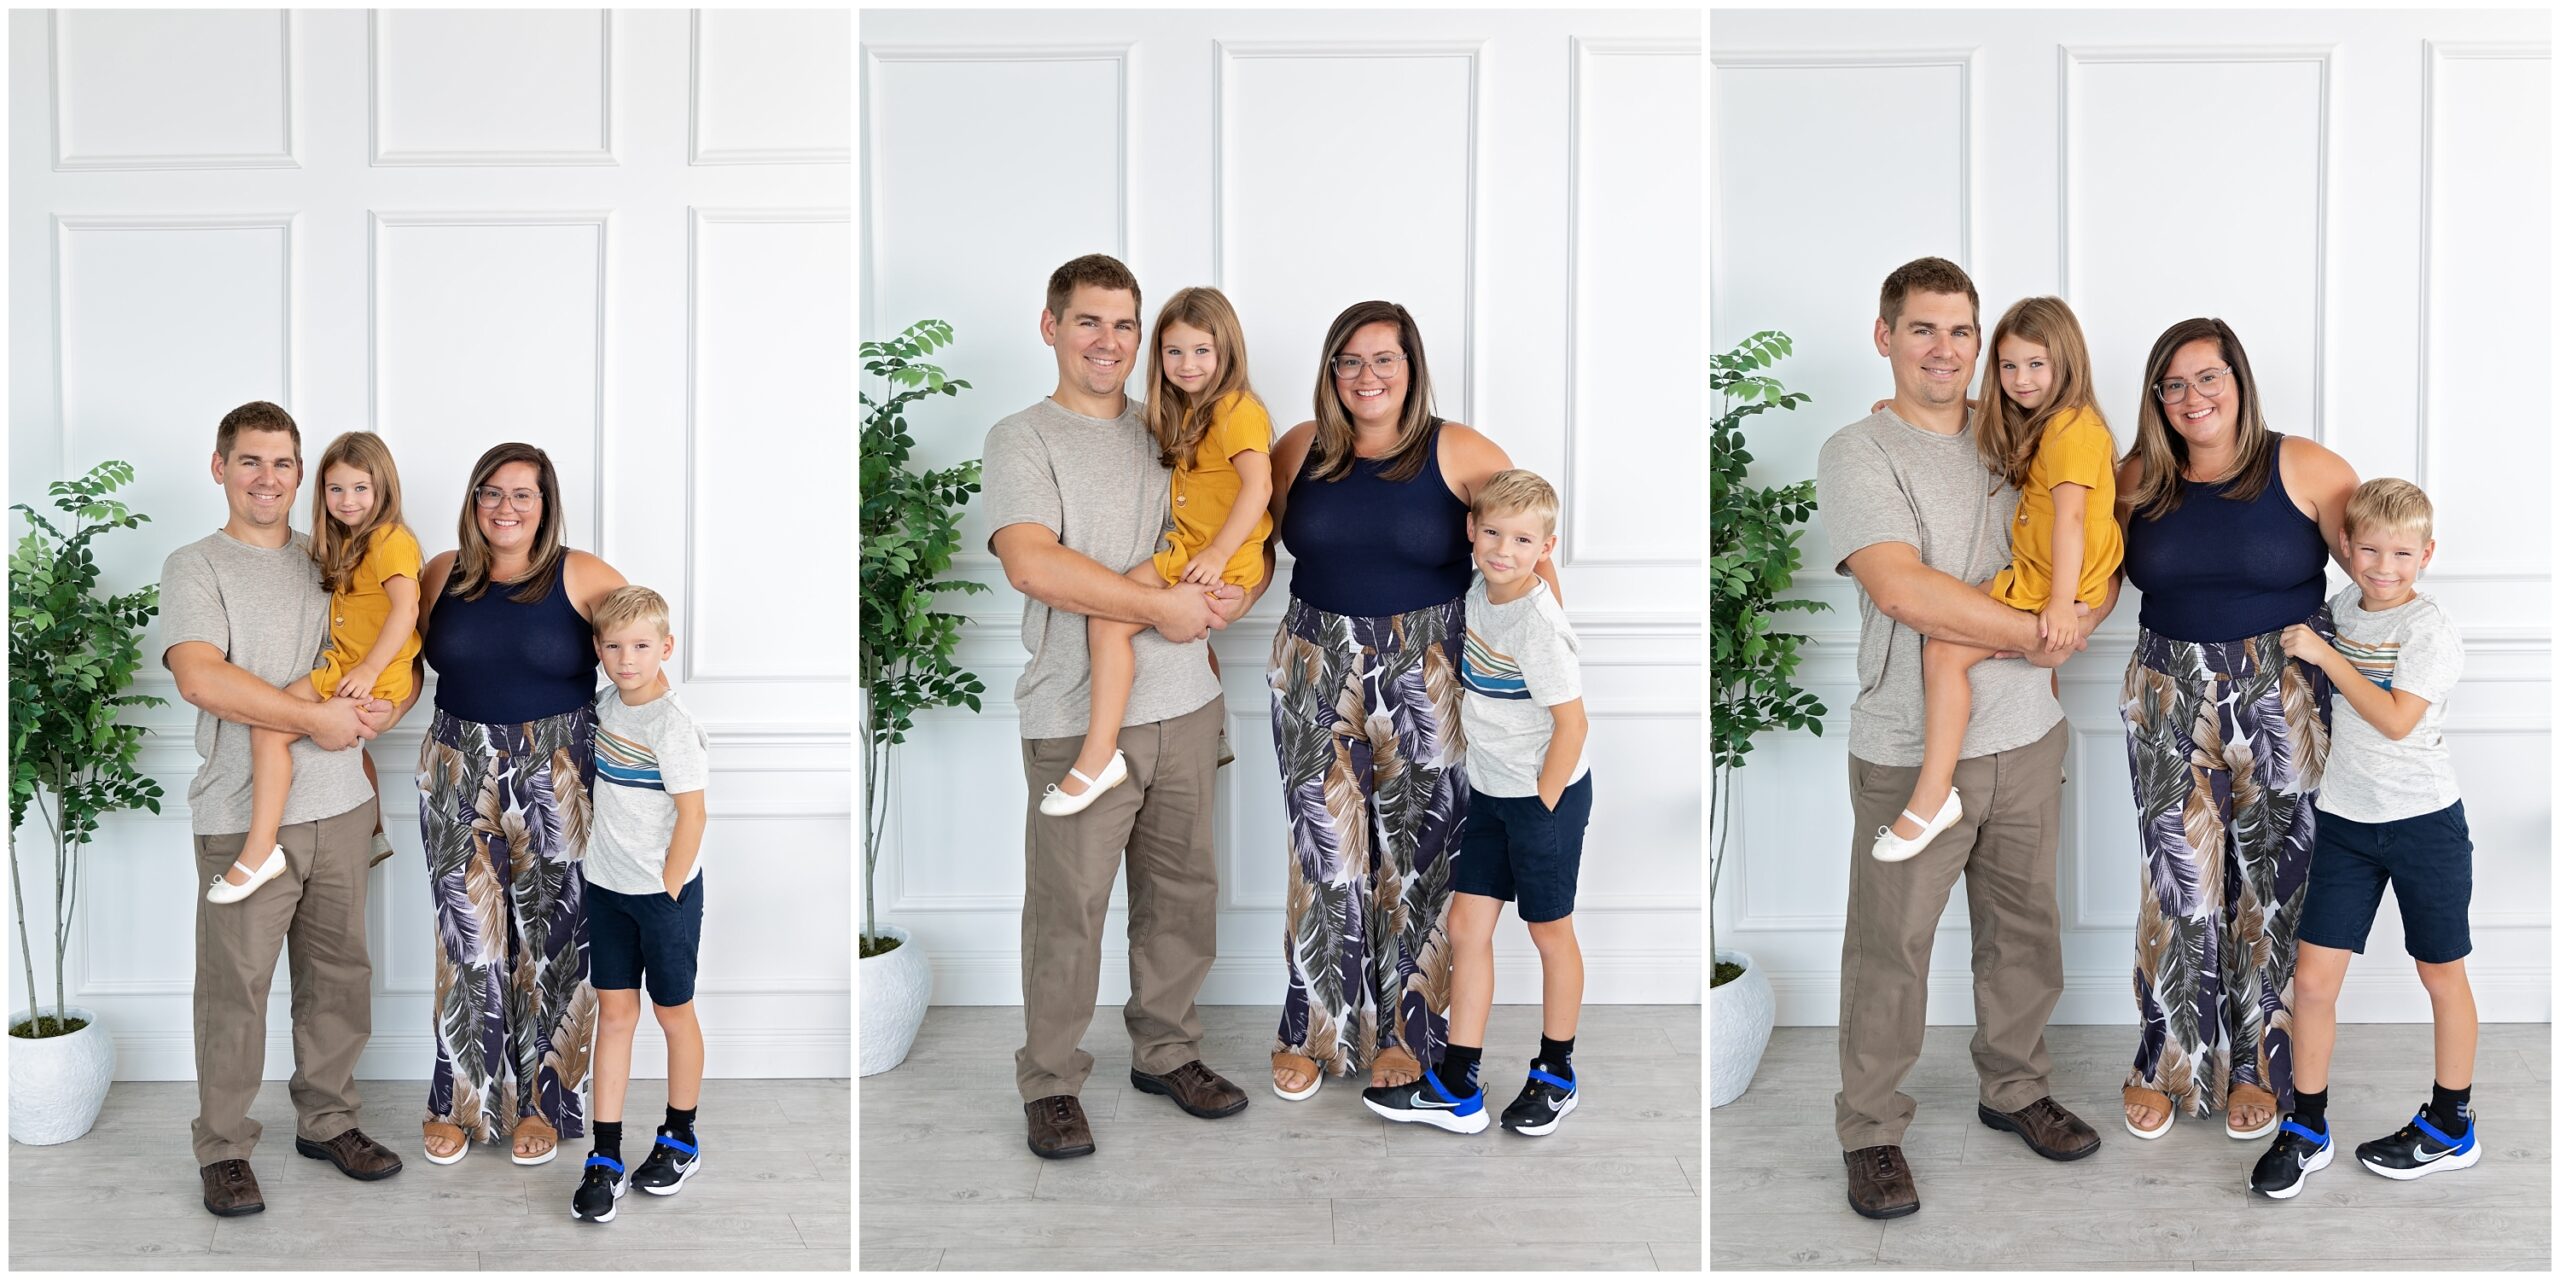 Studio Family Portrait Session in Pittsburgh, PA - Luxe Loft - East End Loft Studio Session in Point Breeze by Plum Borough Family Photographer Catherine Acevedo Photography